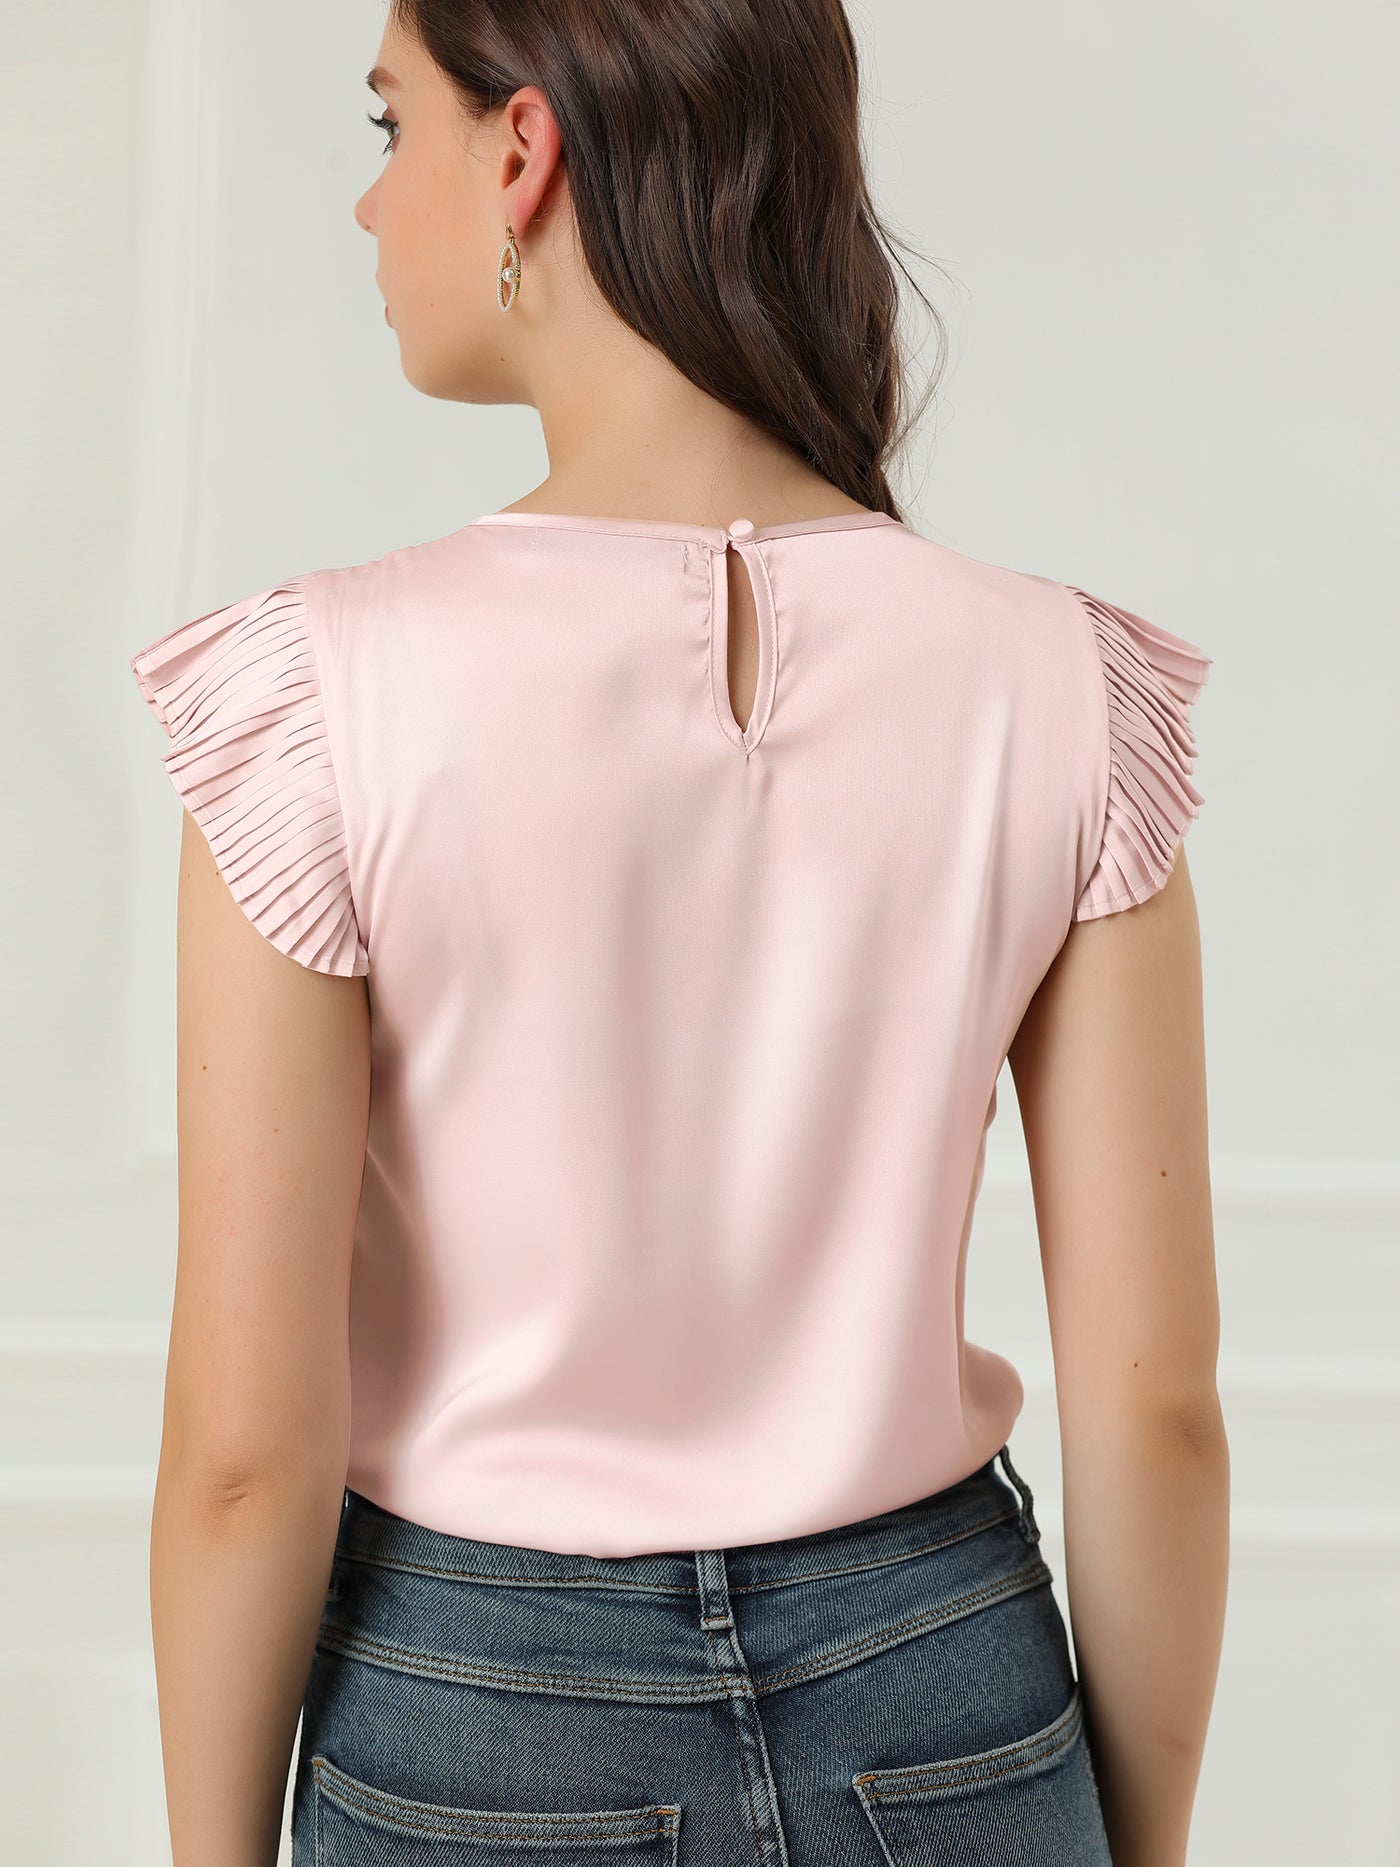 Allegra K Satin Work Office Top Cut Out Keyhole Back Pleated Cap Sleeve Blouse